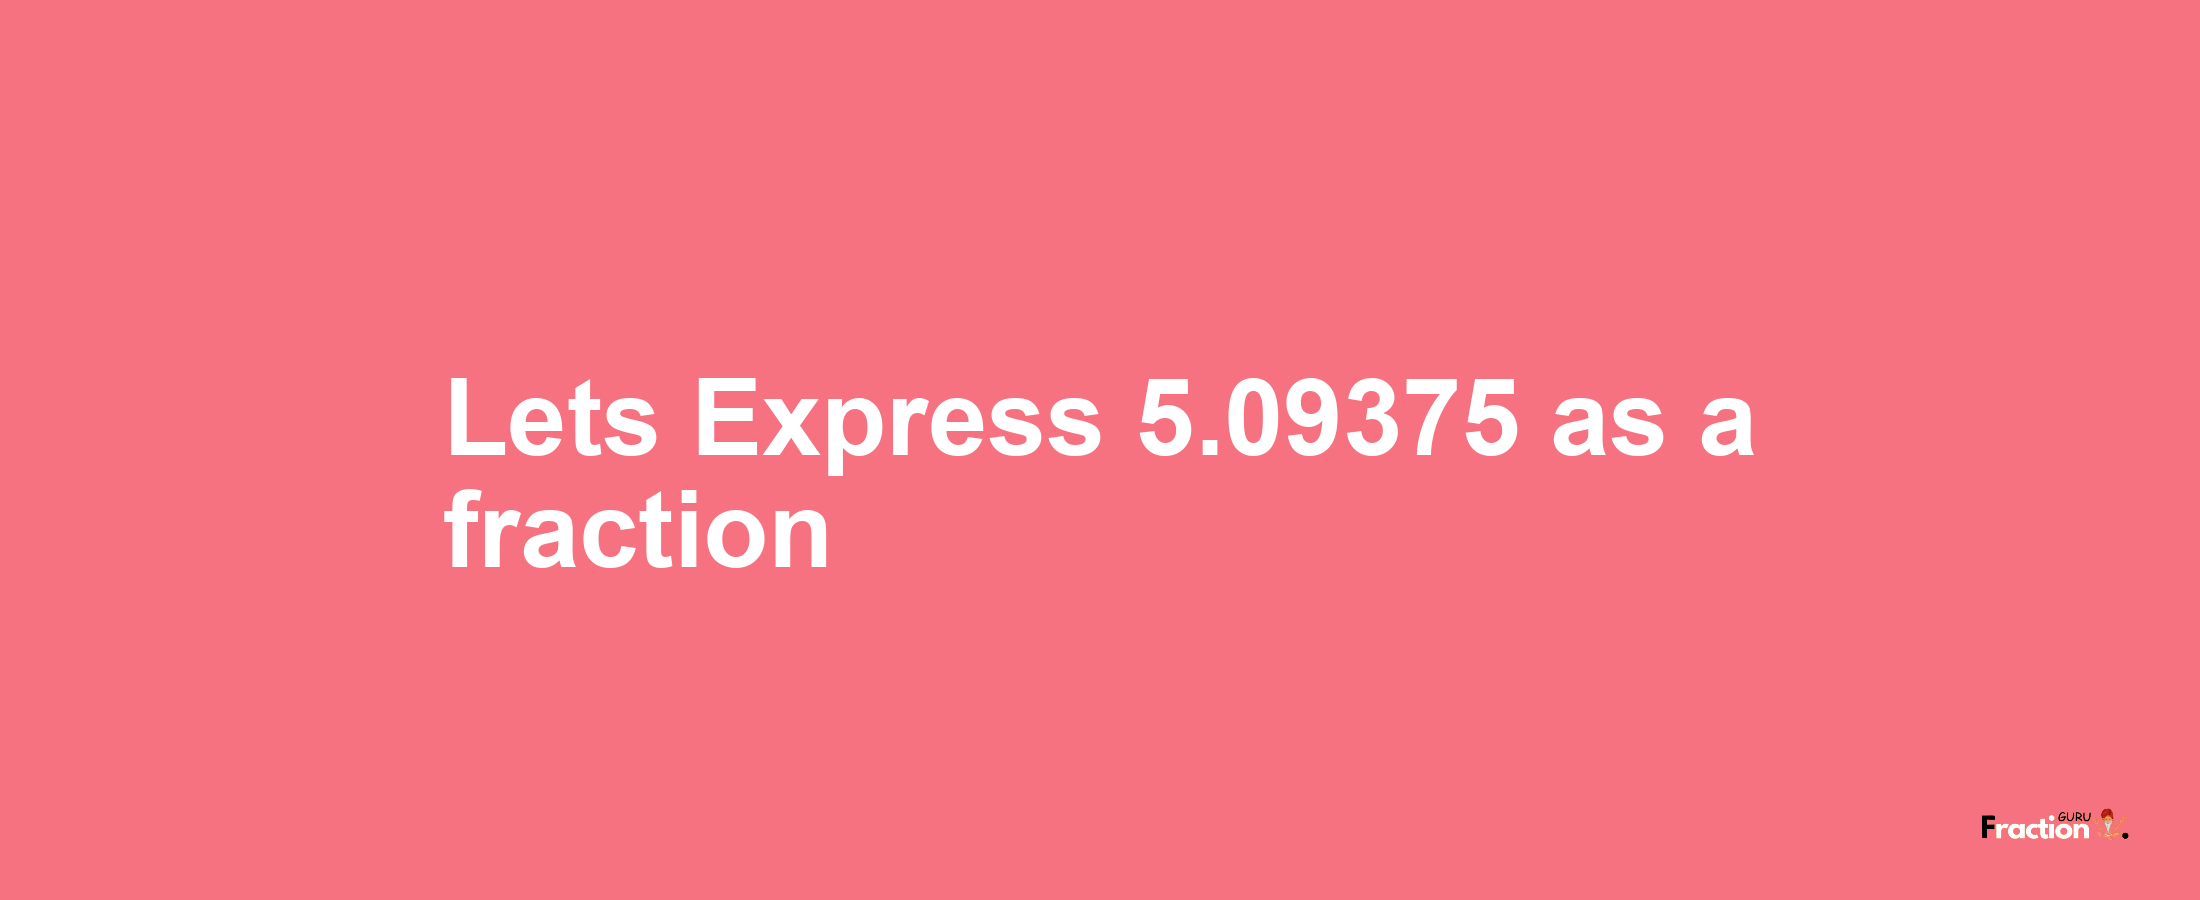 Lets Express 5.09375 as afraction